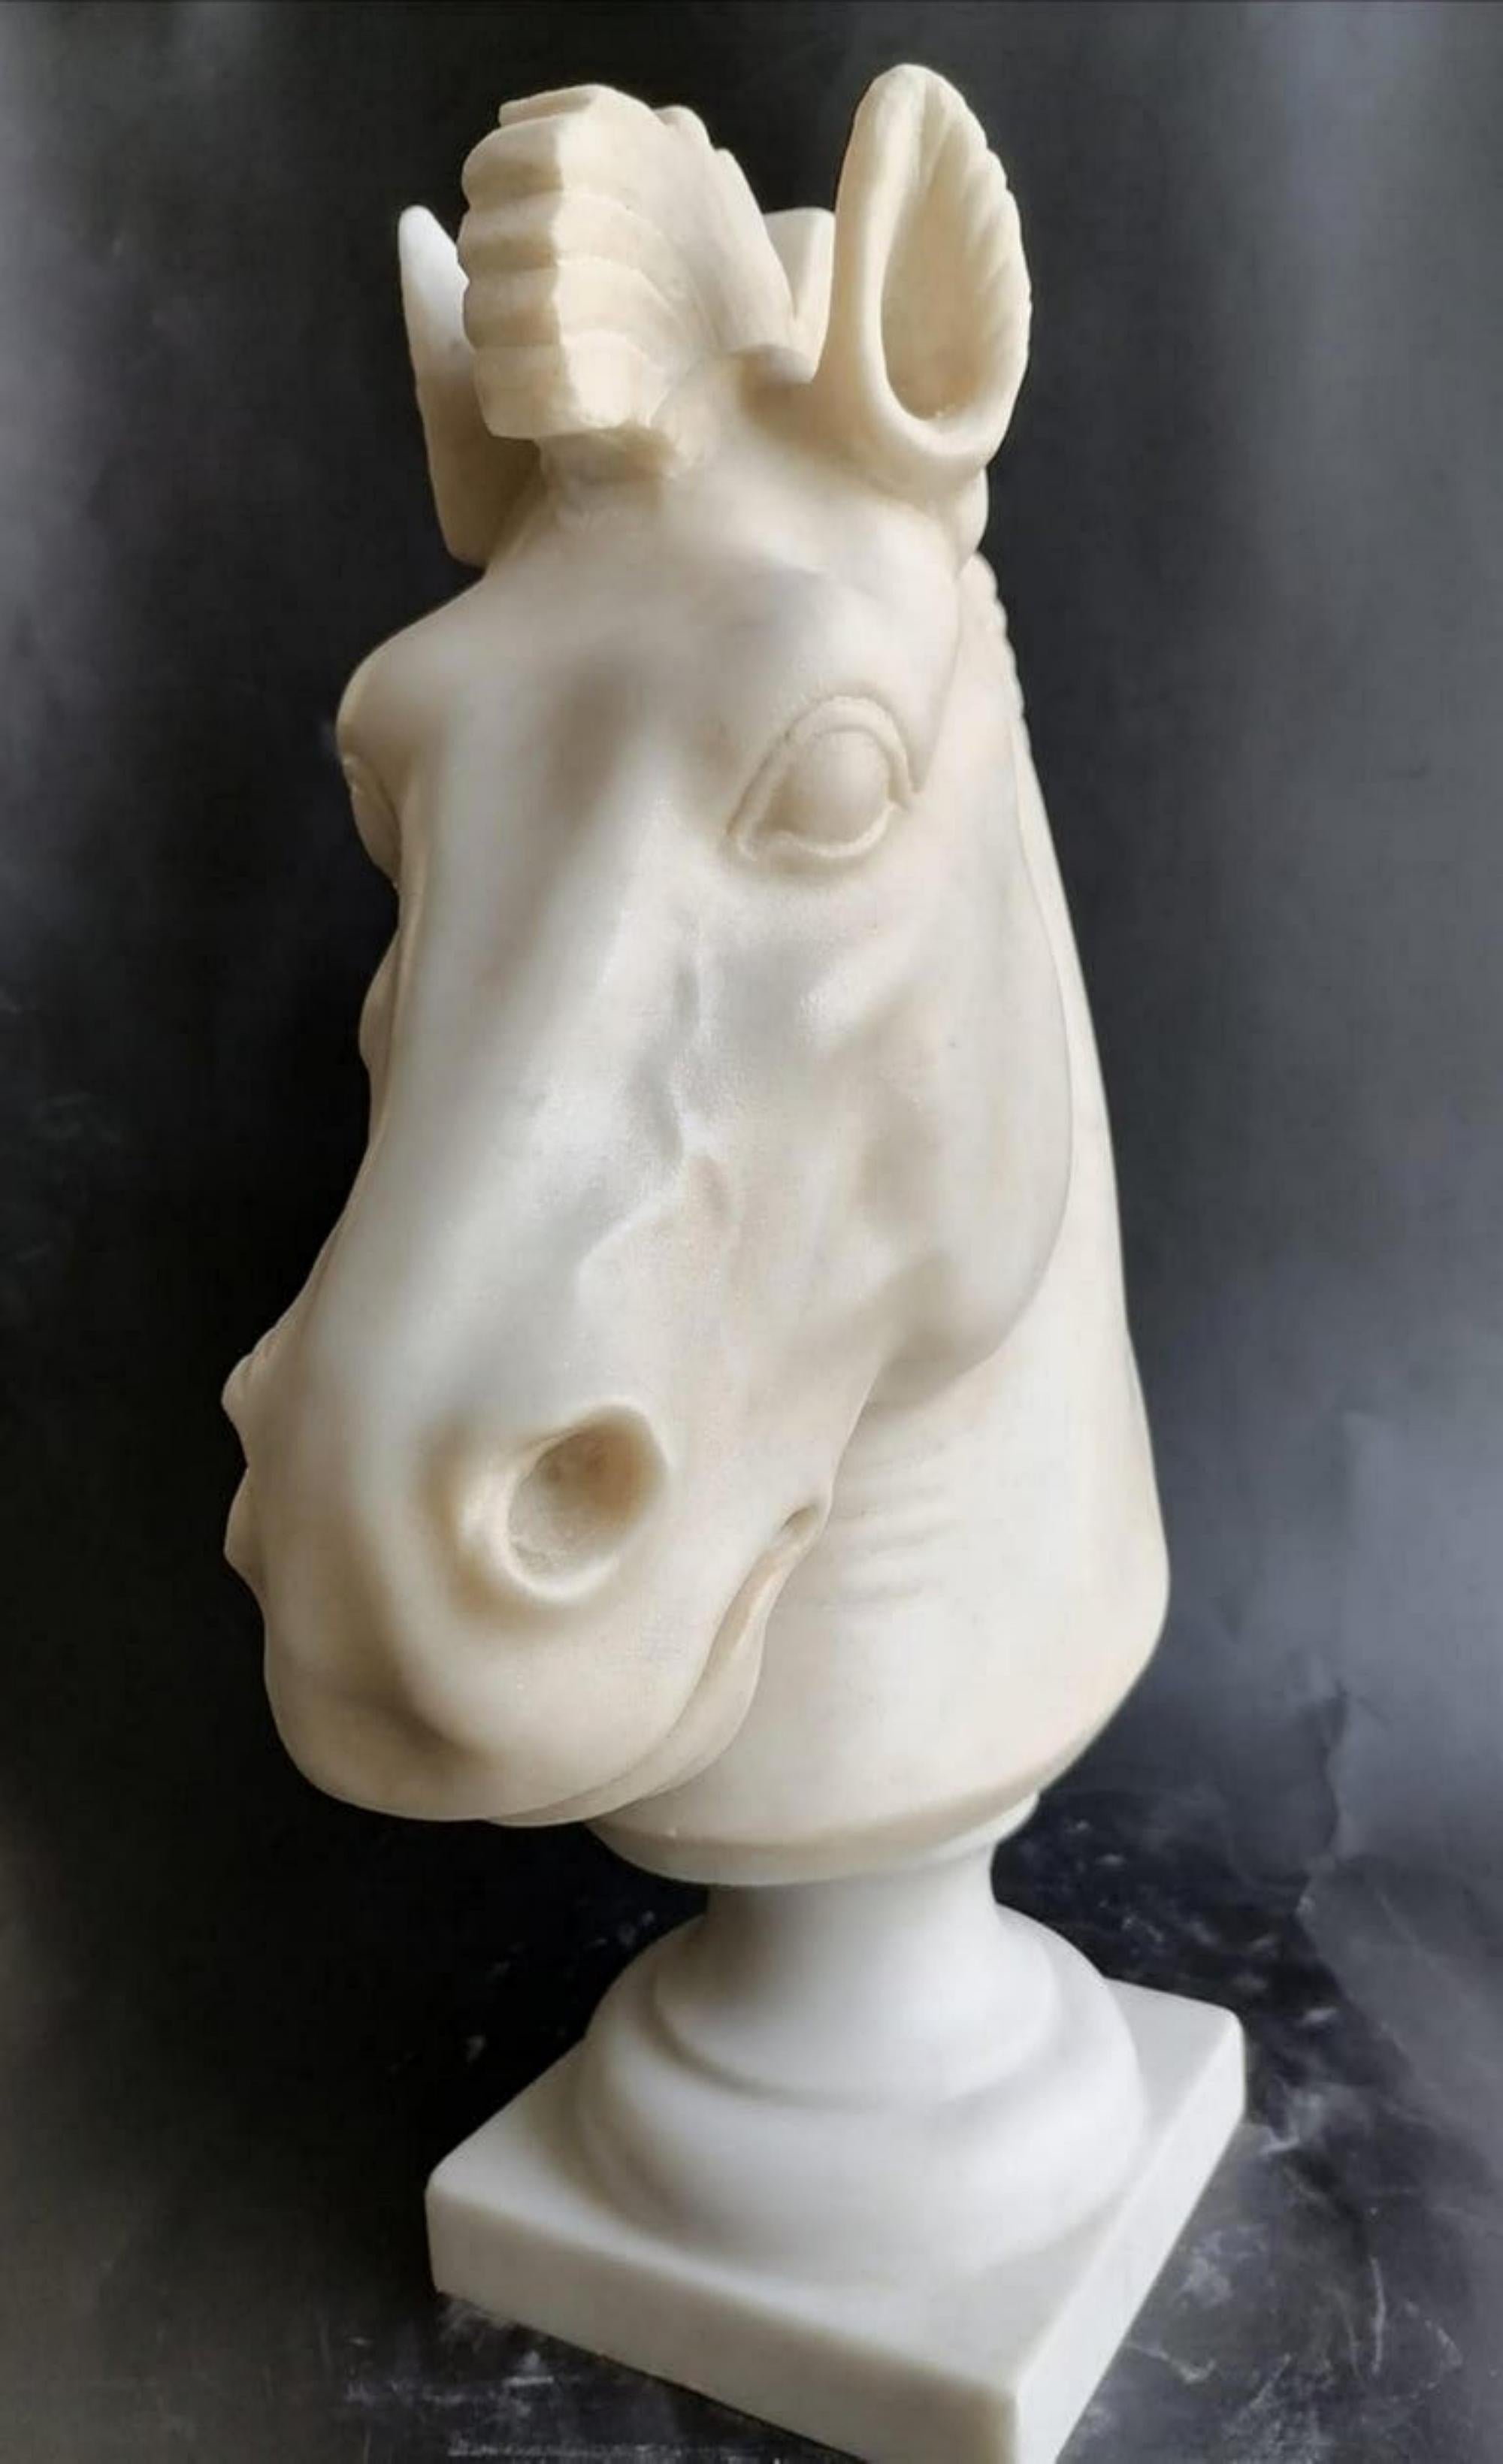 Horse head sculpture on white Carrara marble of a horse in classic style placed on a turned base in Carrara marble. 
End 19th century.
Dimension: including base: H 40 x 30 x 13 cm. 
Good condition - used with small signs of aging & blemishes.